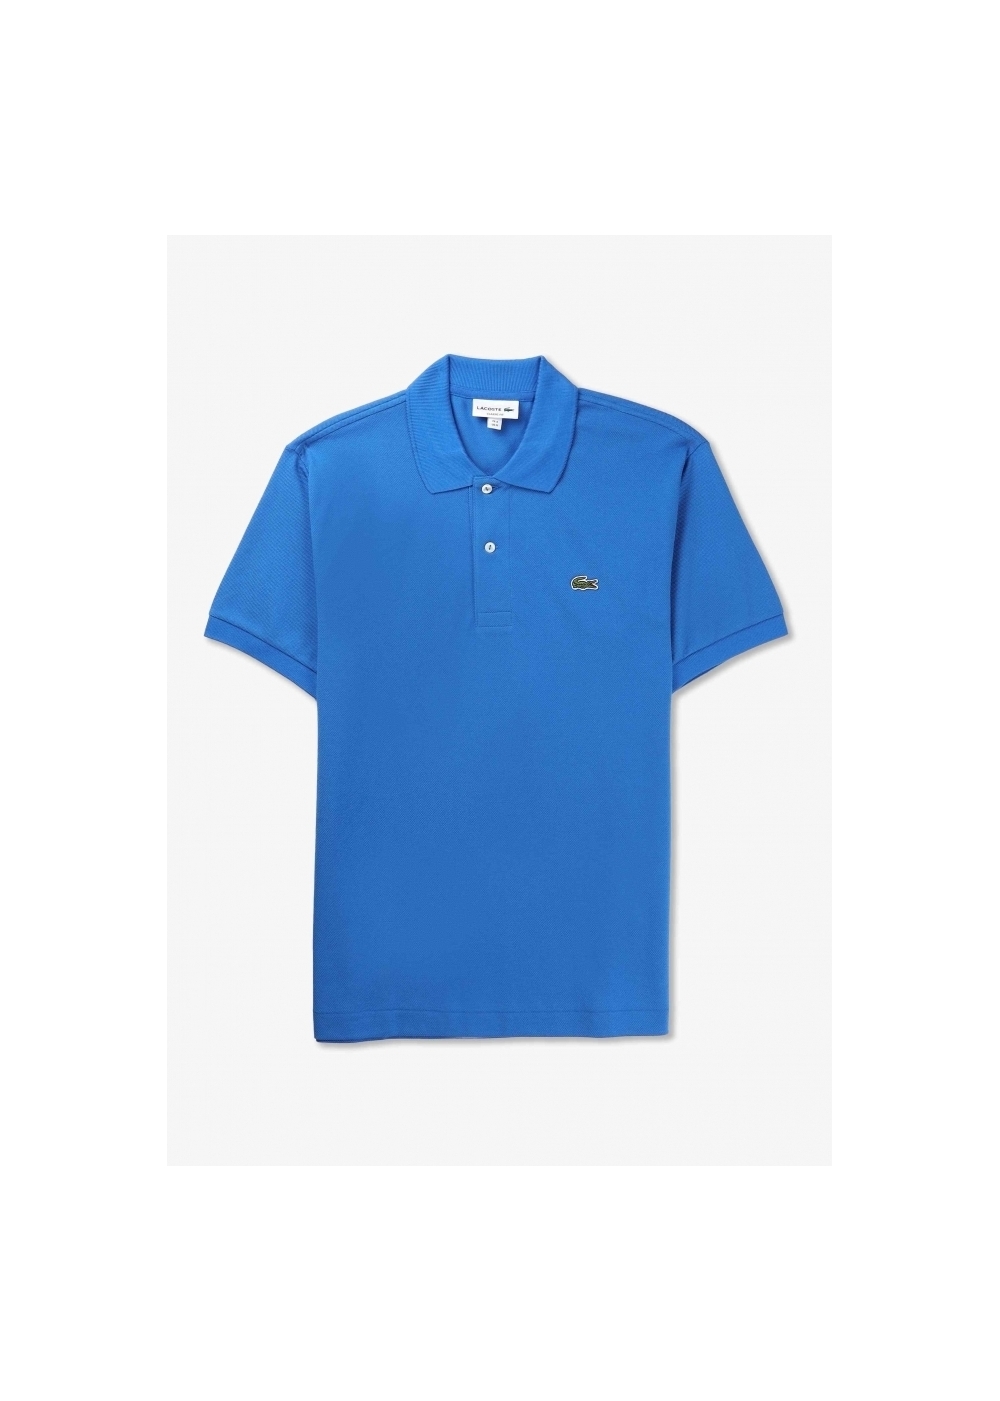 Lacoste Mens Classic Pique Polo Shirt In Blue